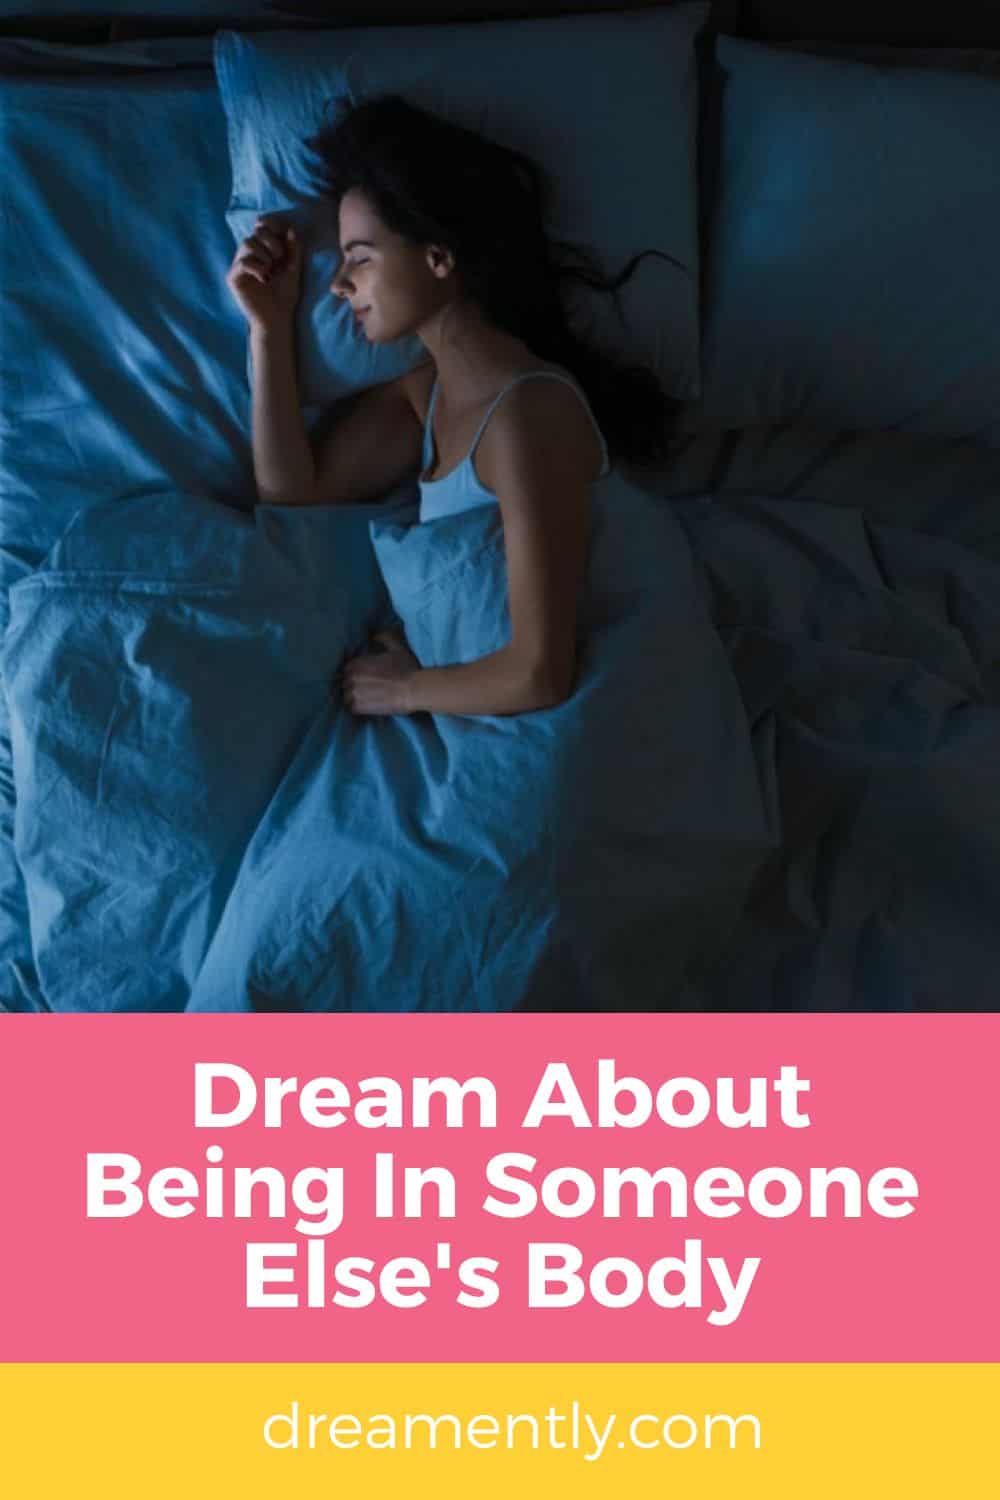 Dream About Being In Someone Else's Body